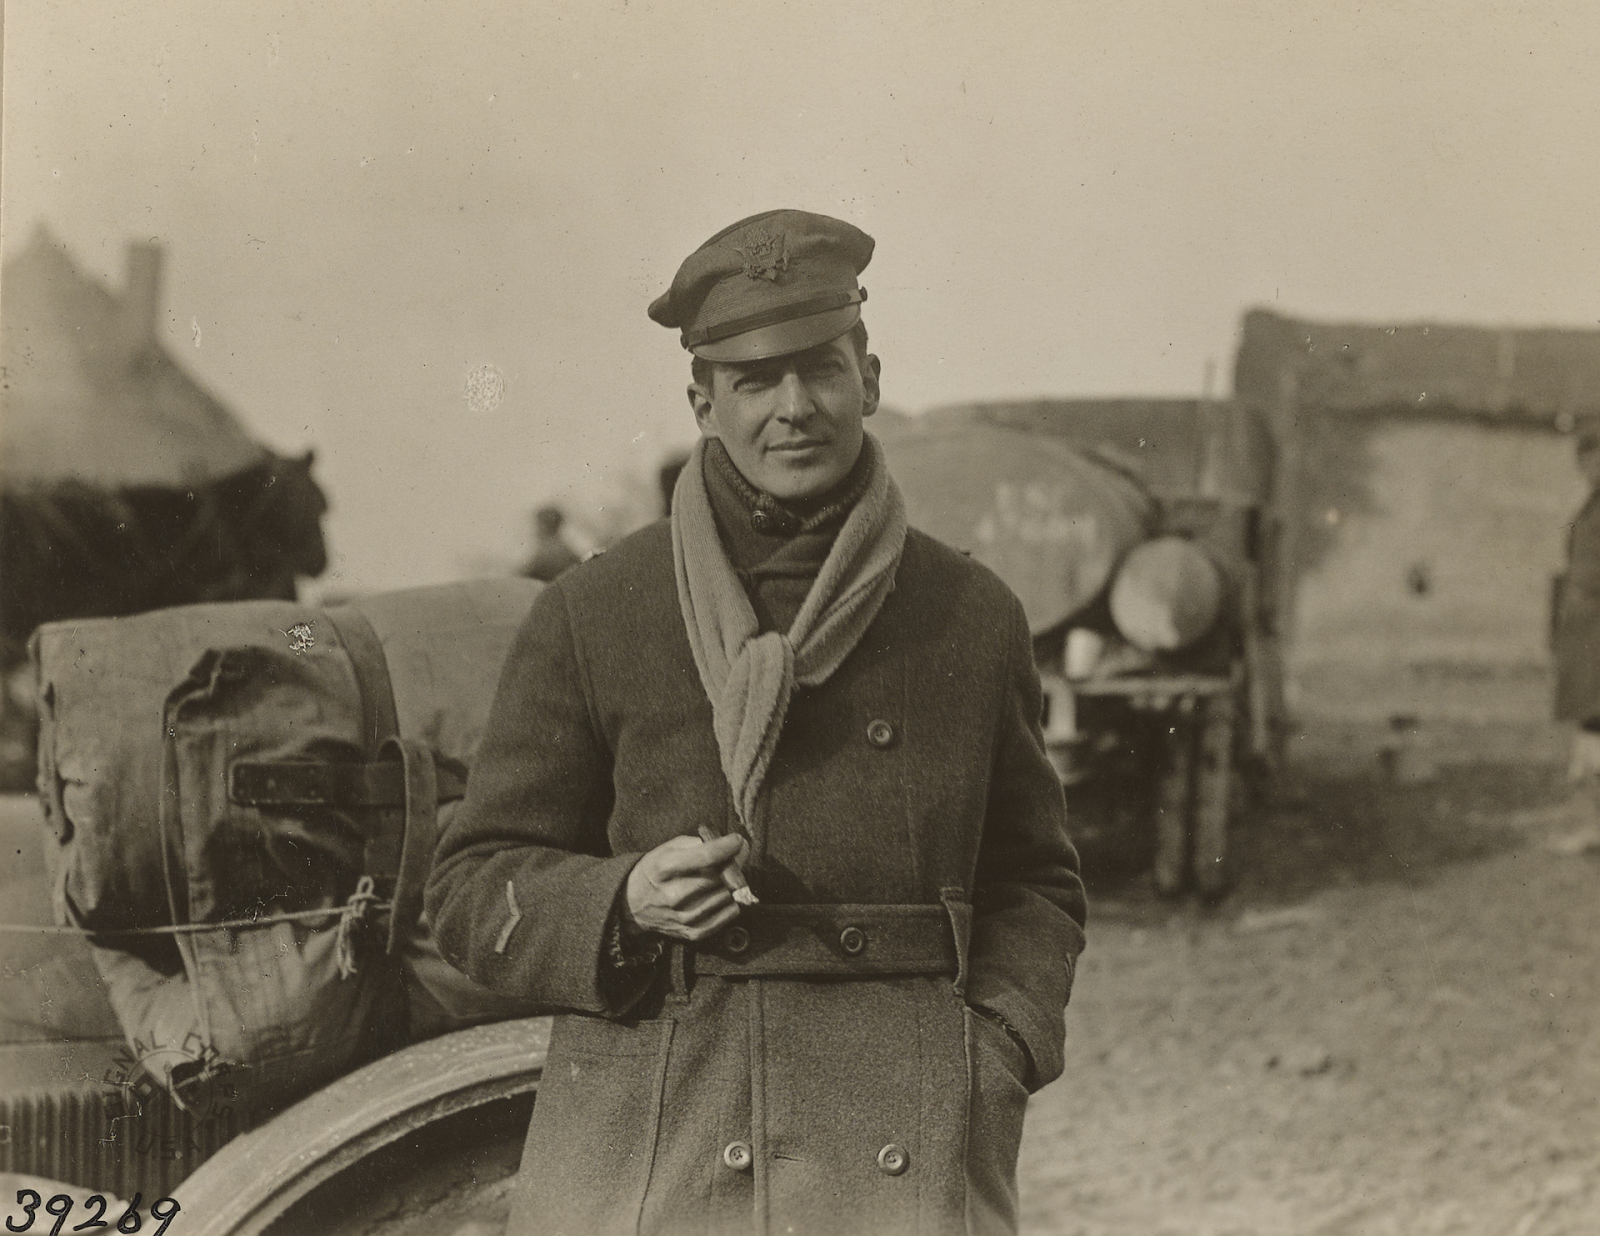 Brig. Gen. Douglas McArthur smoking a cigar and standing in front of his car.